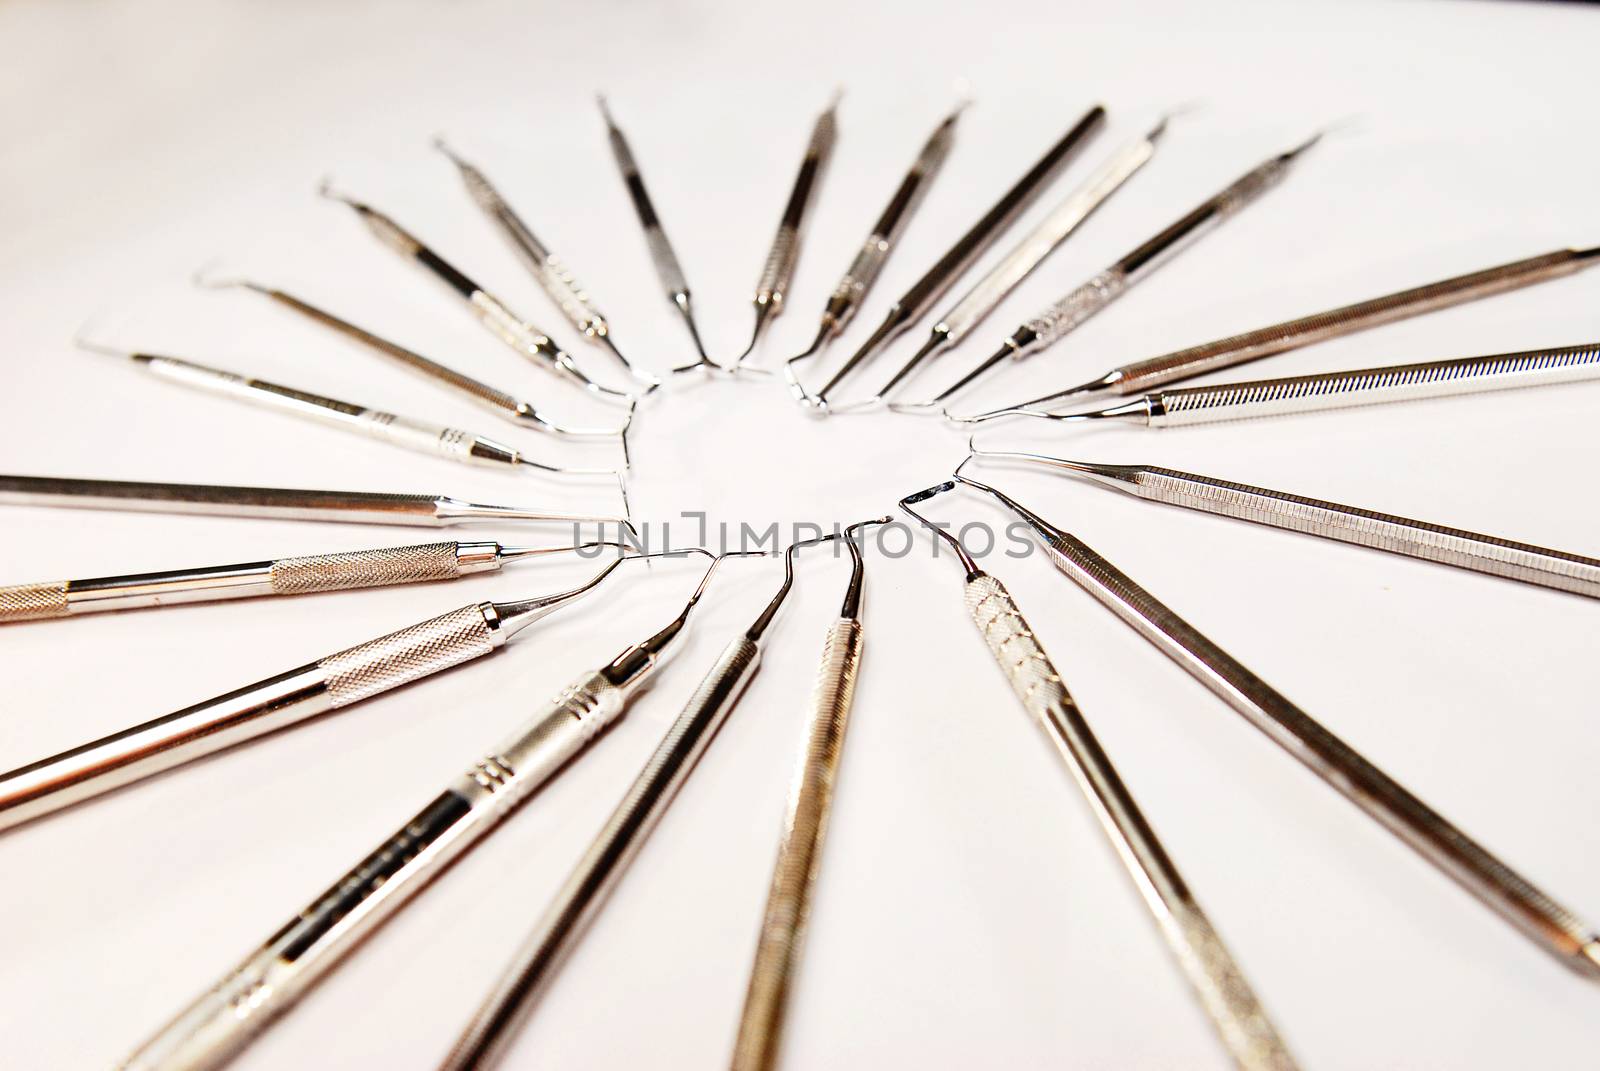 Dental instruments in heart shape on white background by Hepjam